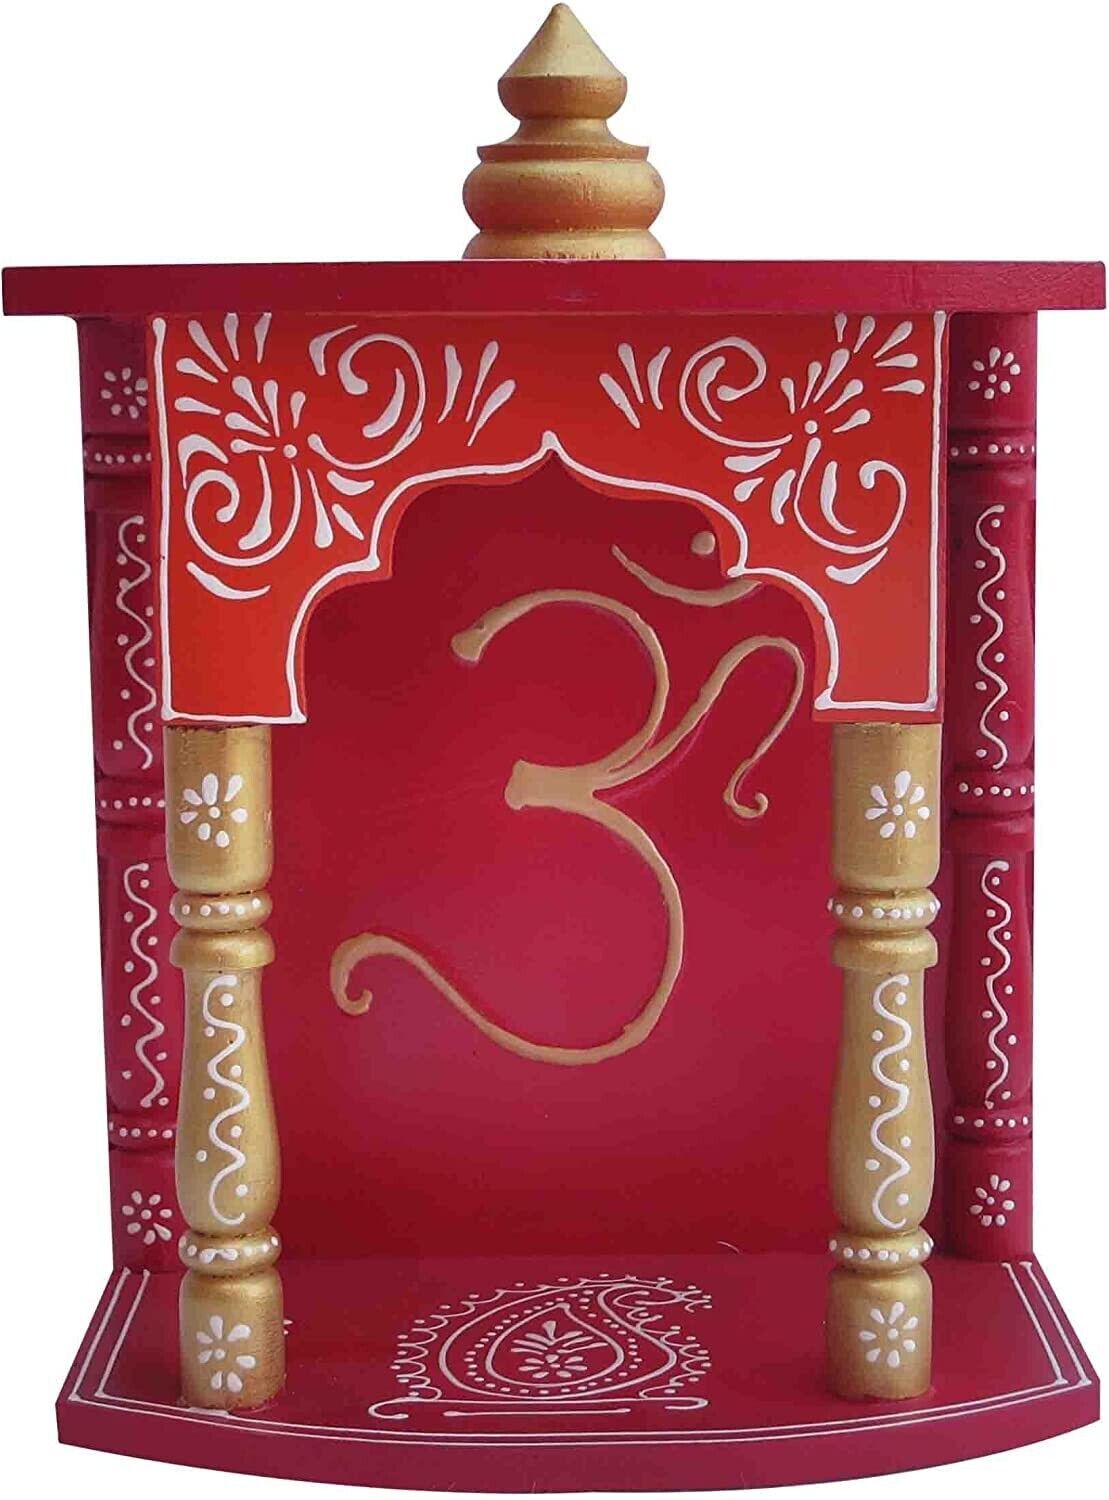 Handicraft Store Hindu Religious colourfull Wood Temple with swastick Symbol for